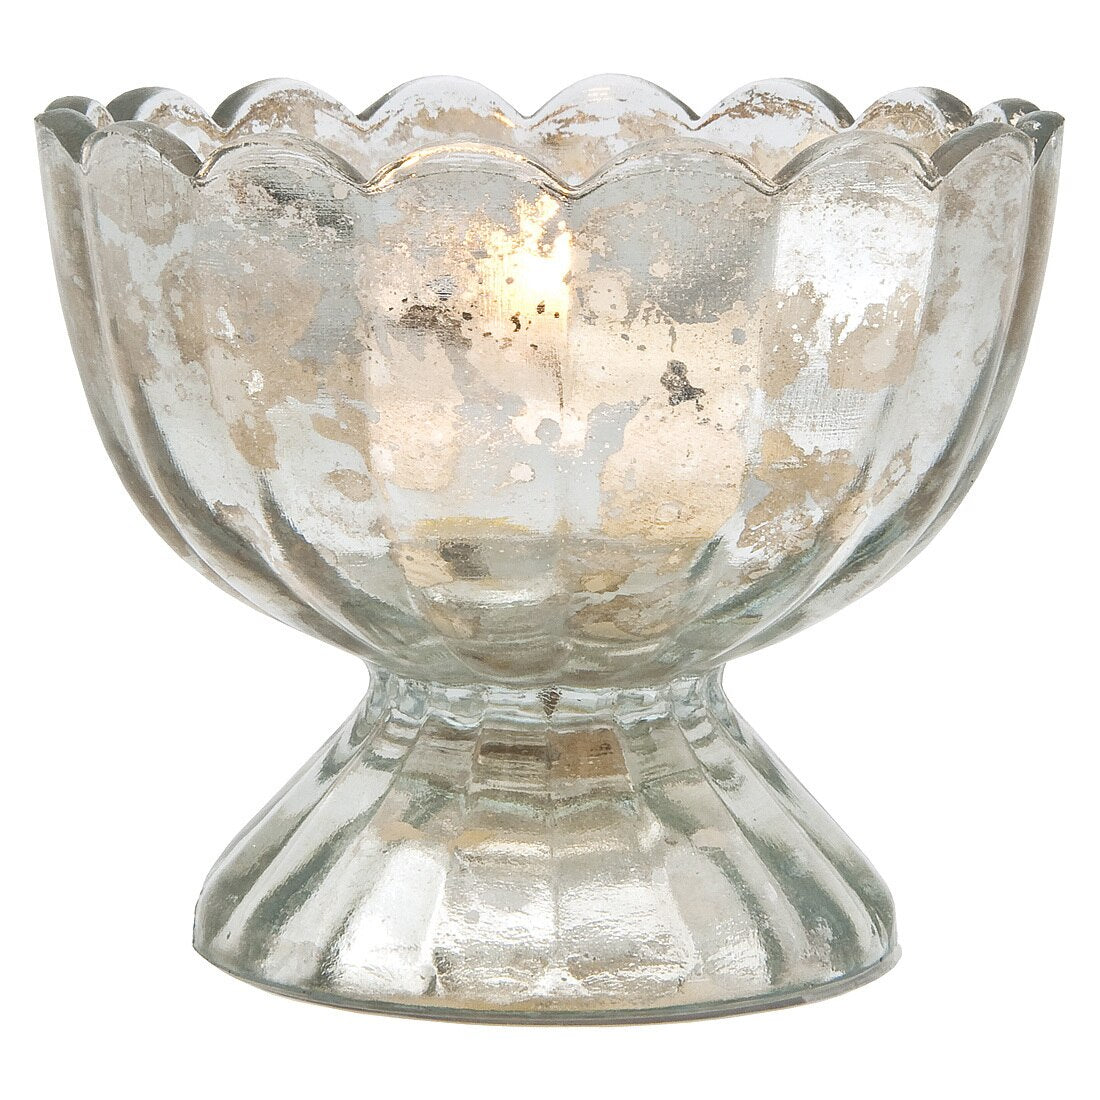 Vintage Mercury Glass Candle Holder (3-Inch, Suzanne Design, Sundae Cup Motif, Silver) - For Use with Tea Lights - Home Decor and Wedding Decorations - PaperLanternStore.com - Paper Lanterns, Decor, Party Lights & More